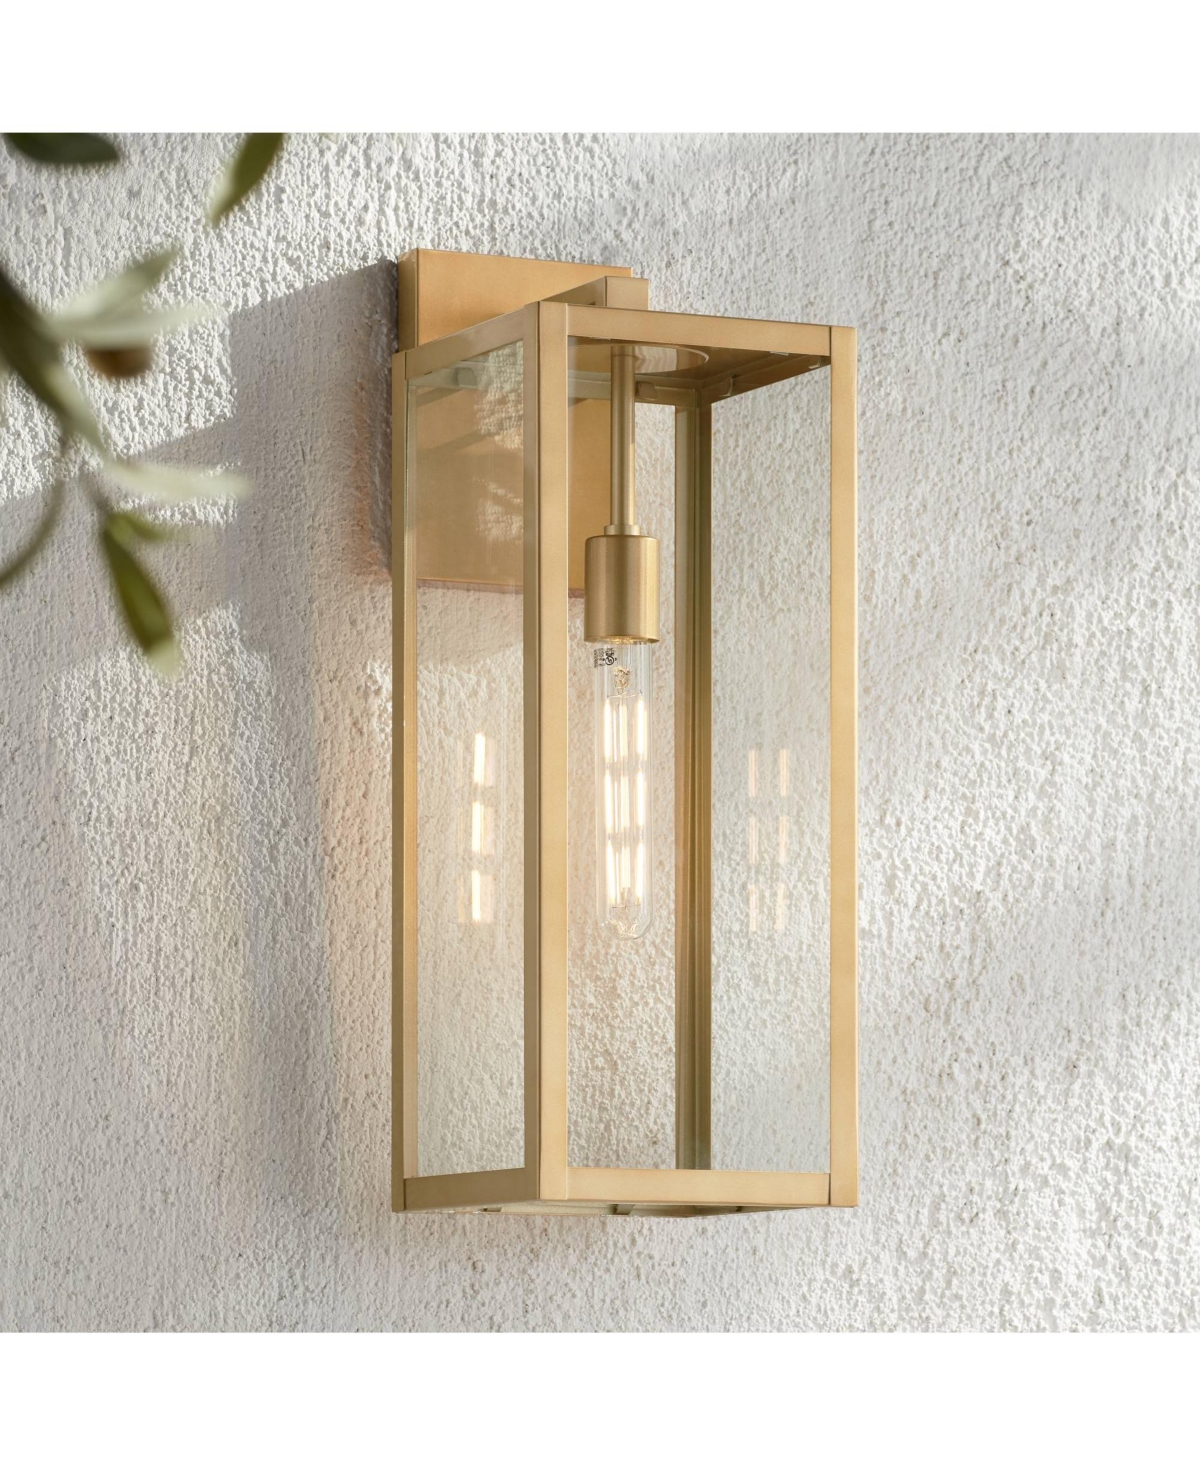 Titan 20 1/4" High Modern Outdoor Wall Light Fixture Mount Porch House Exterior Outside Lantern Edison Bulb Soft Gold Finish Clear Glass Shade Front D